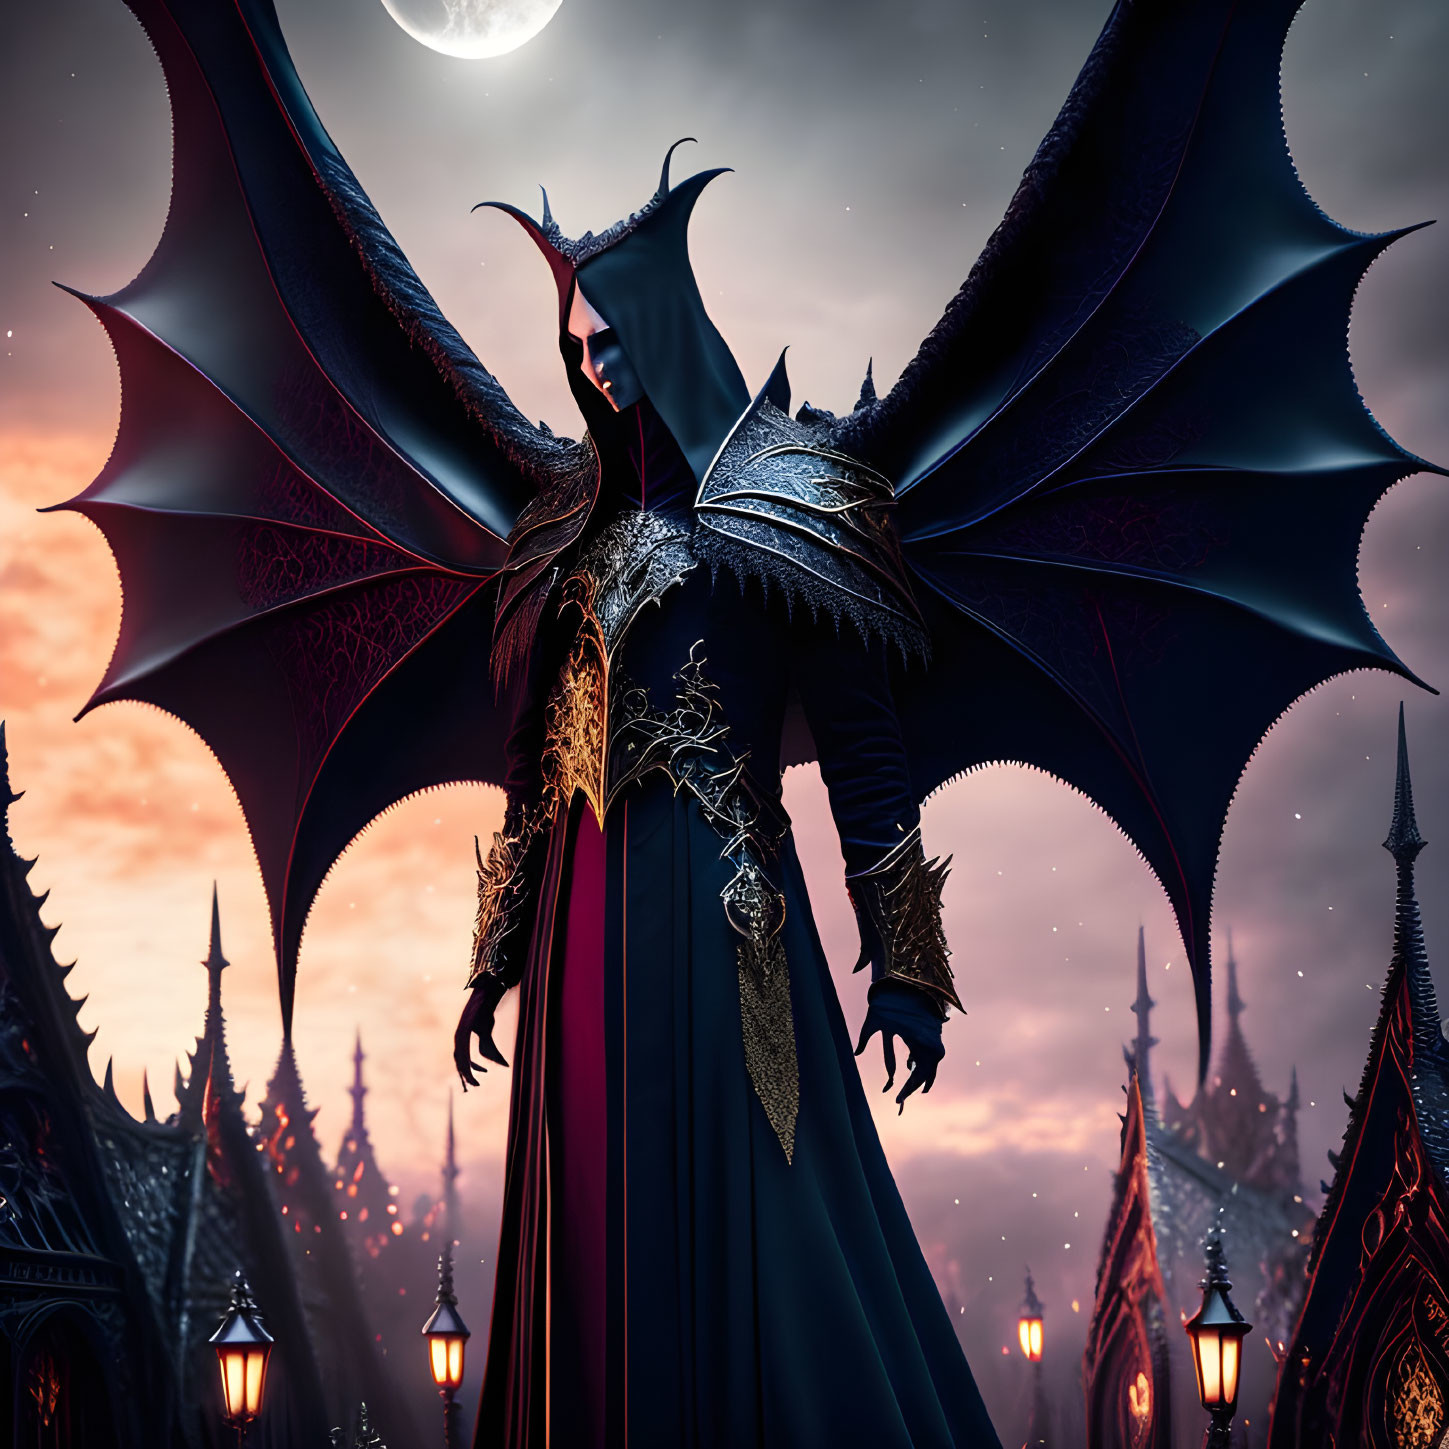 Majestic figure with large wings in dark cloak at gothic castle